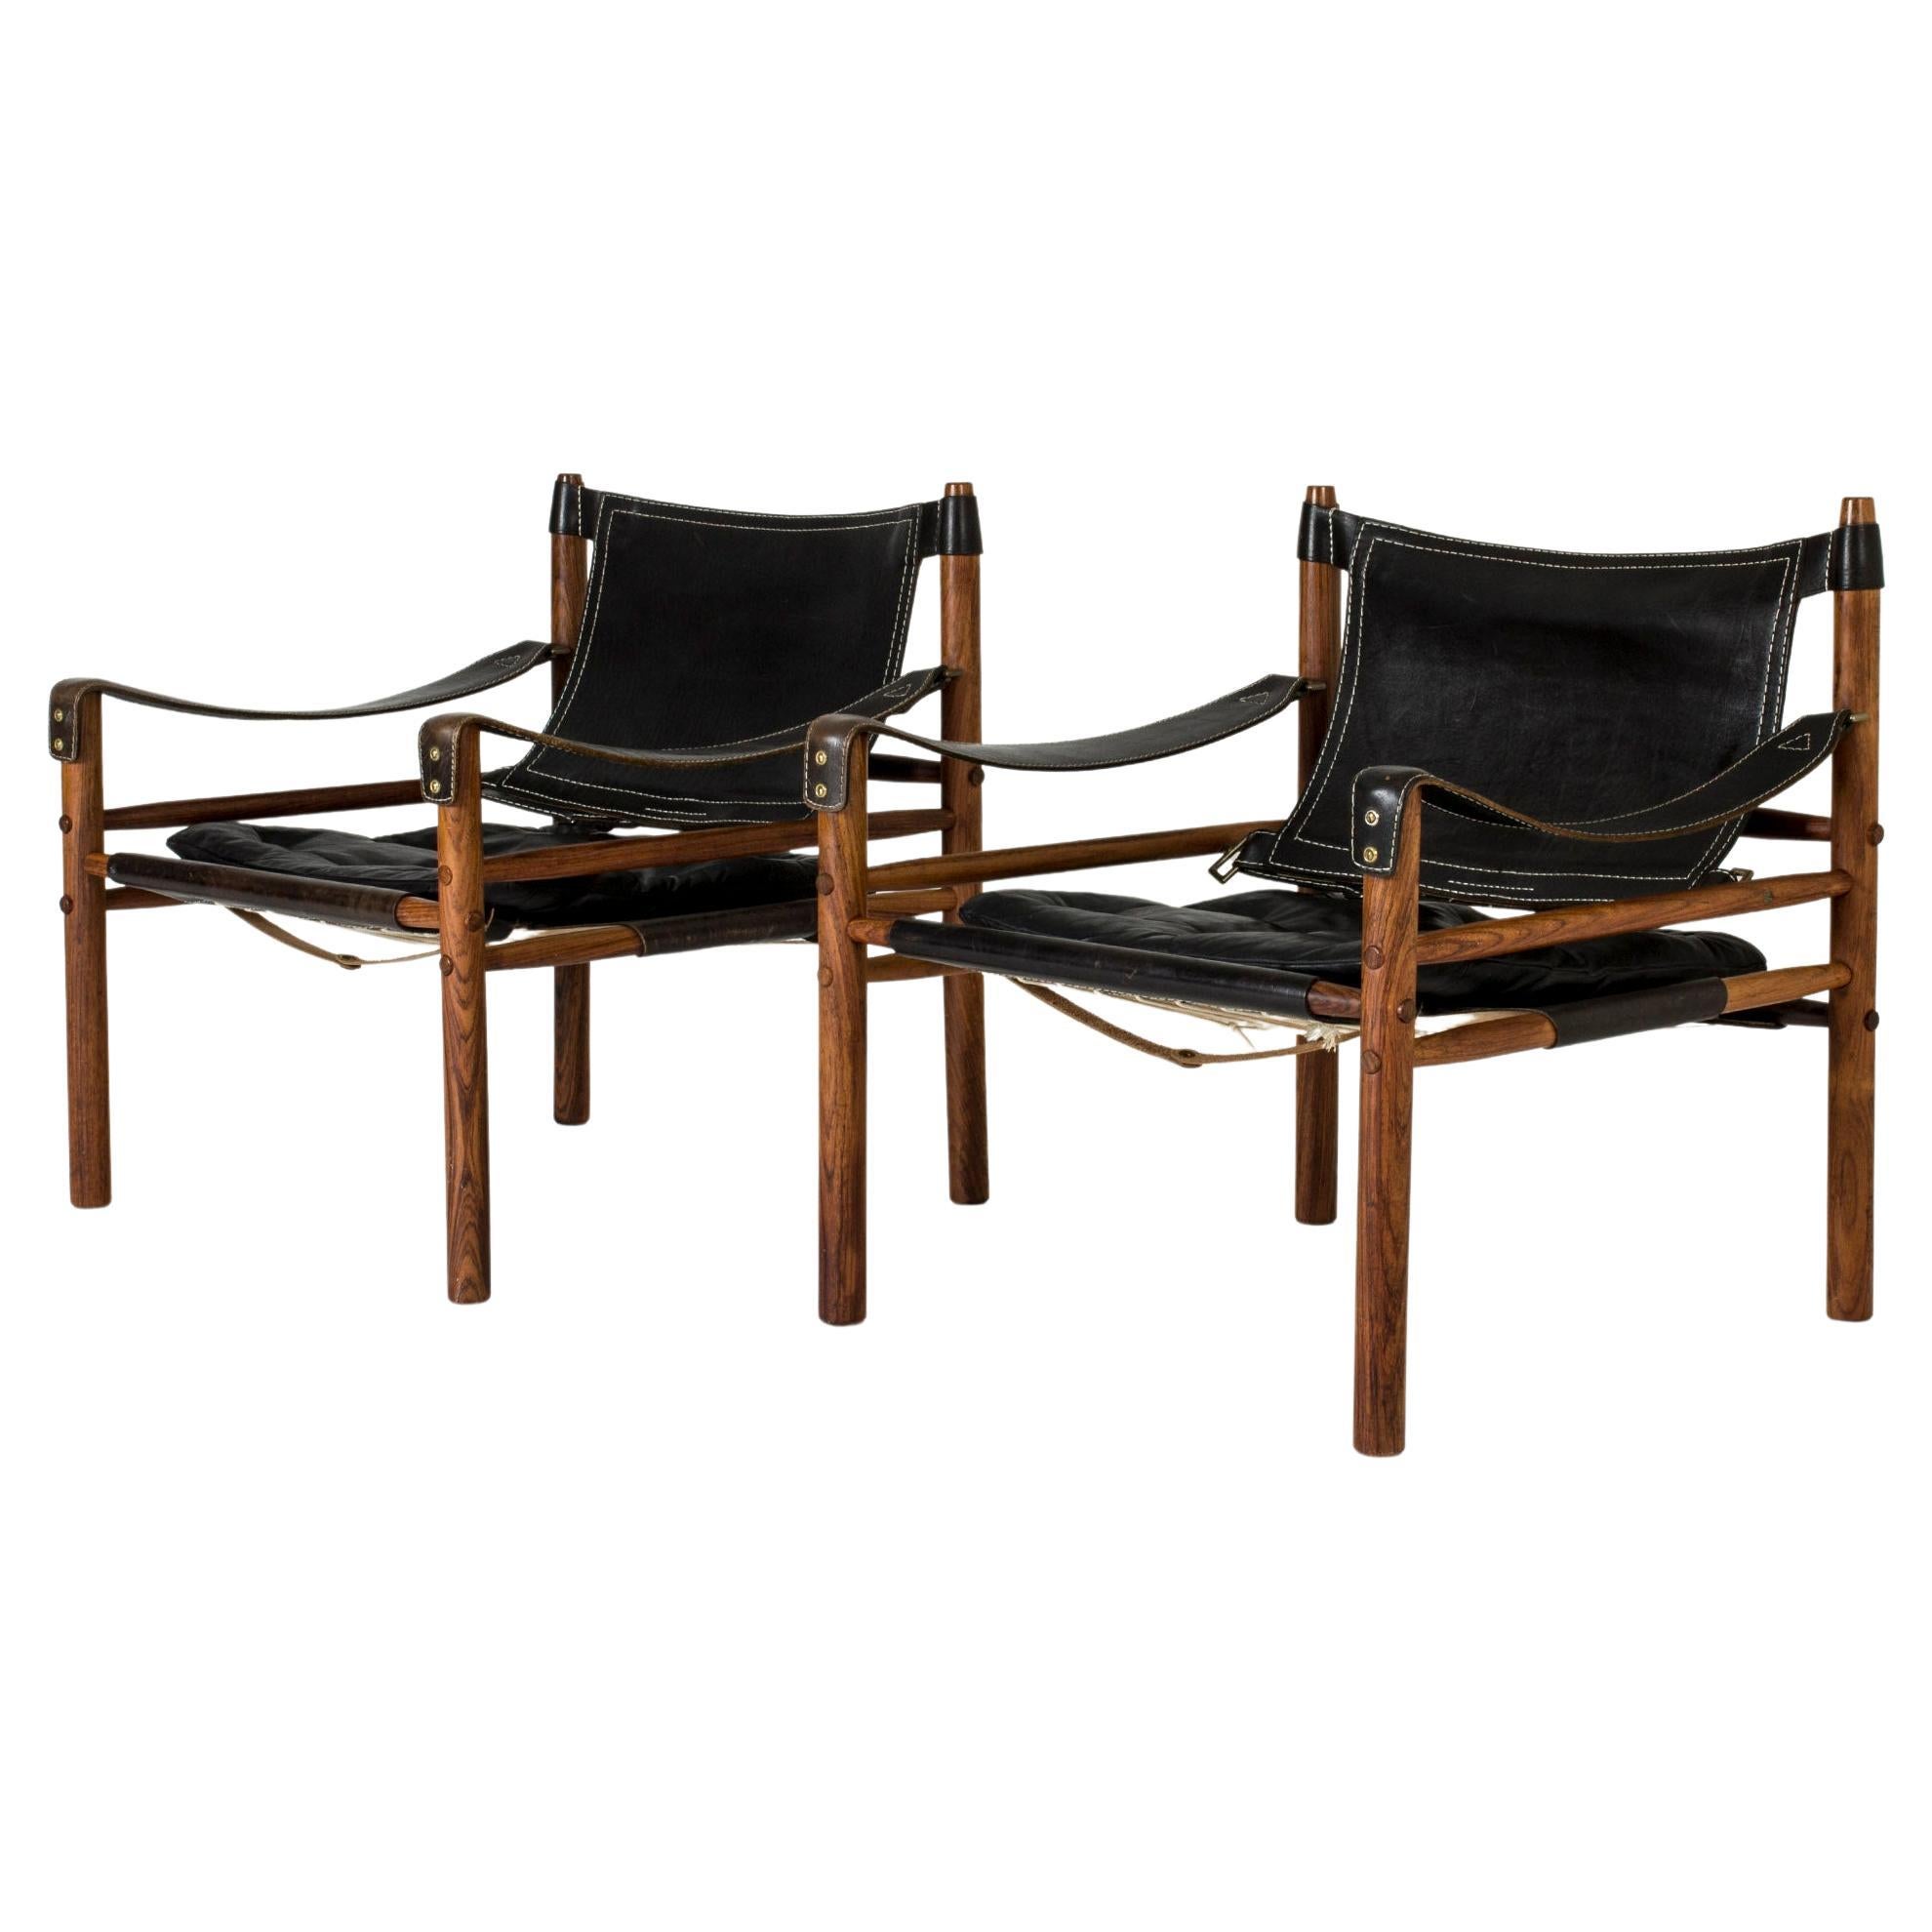 Pair of Midcentury "Sirocco" Lounge Chairs by Arne Norell, Sweden, 1960s